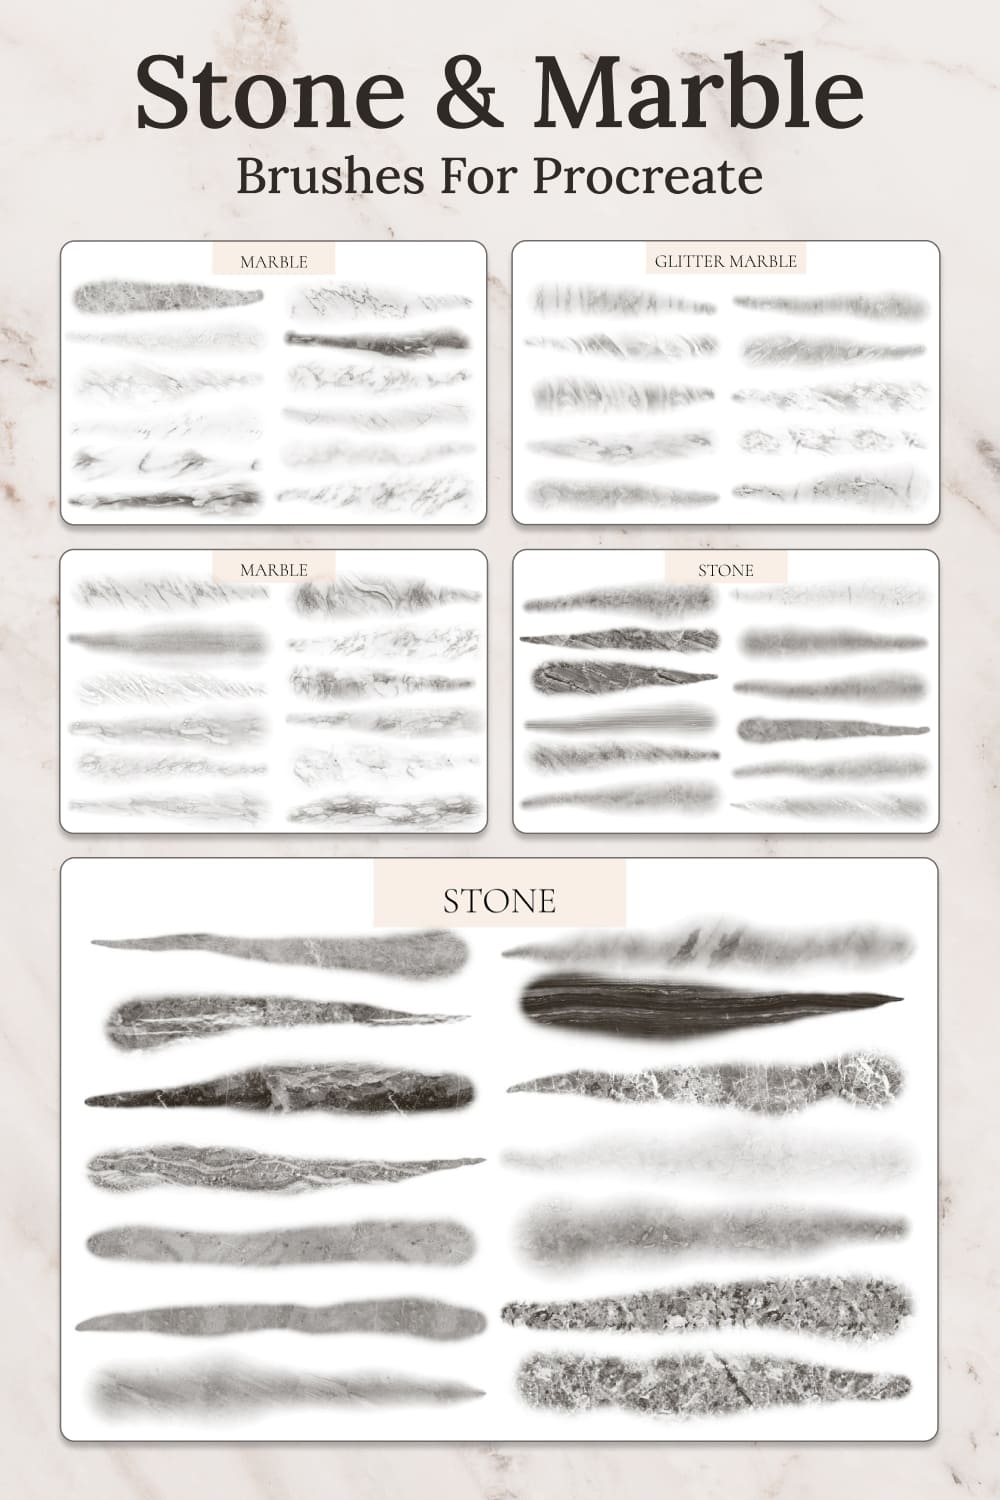 Stone & Marble Brushes for Procreate - pinterest image preview.